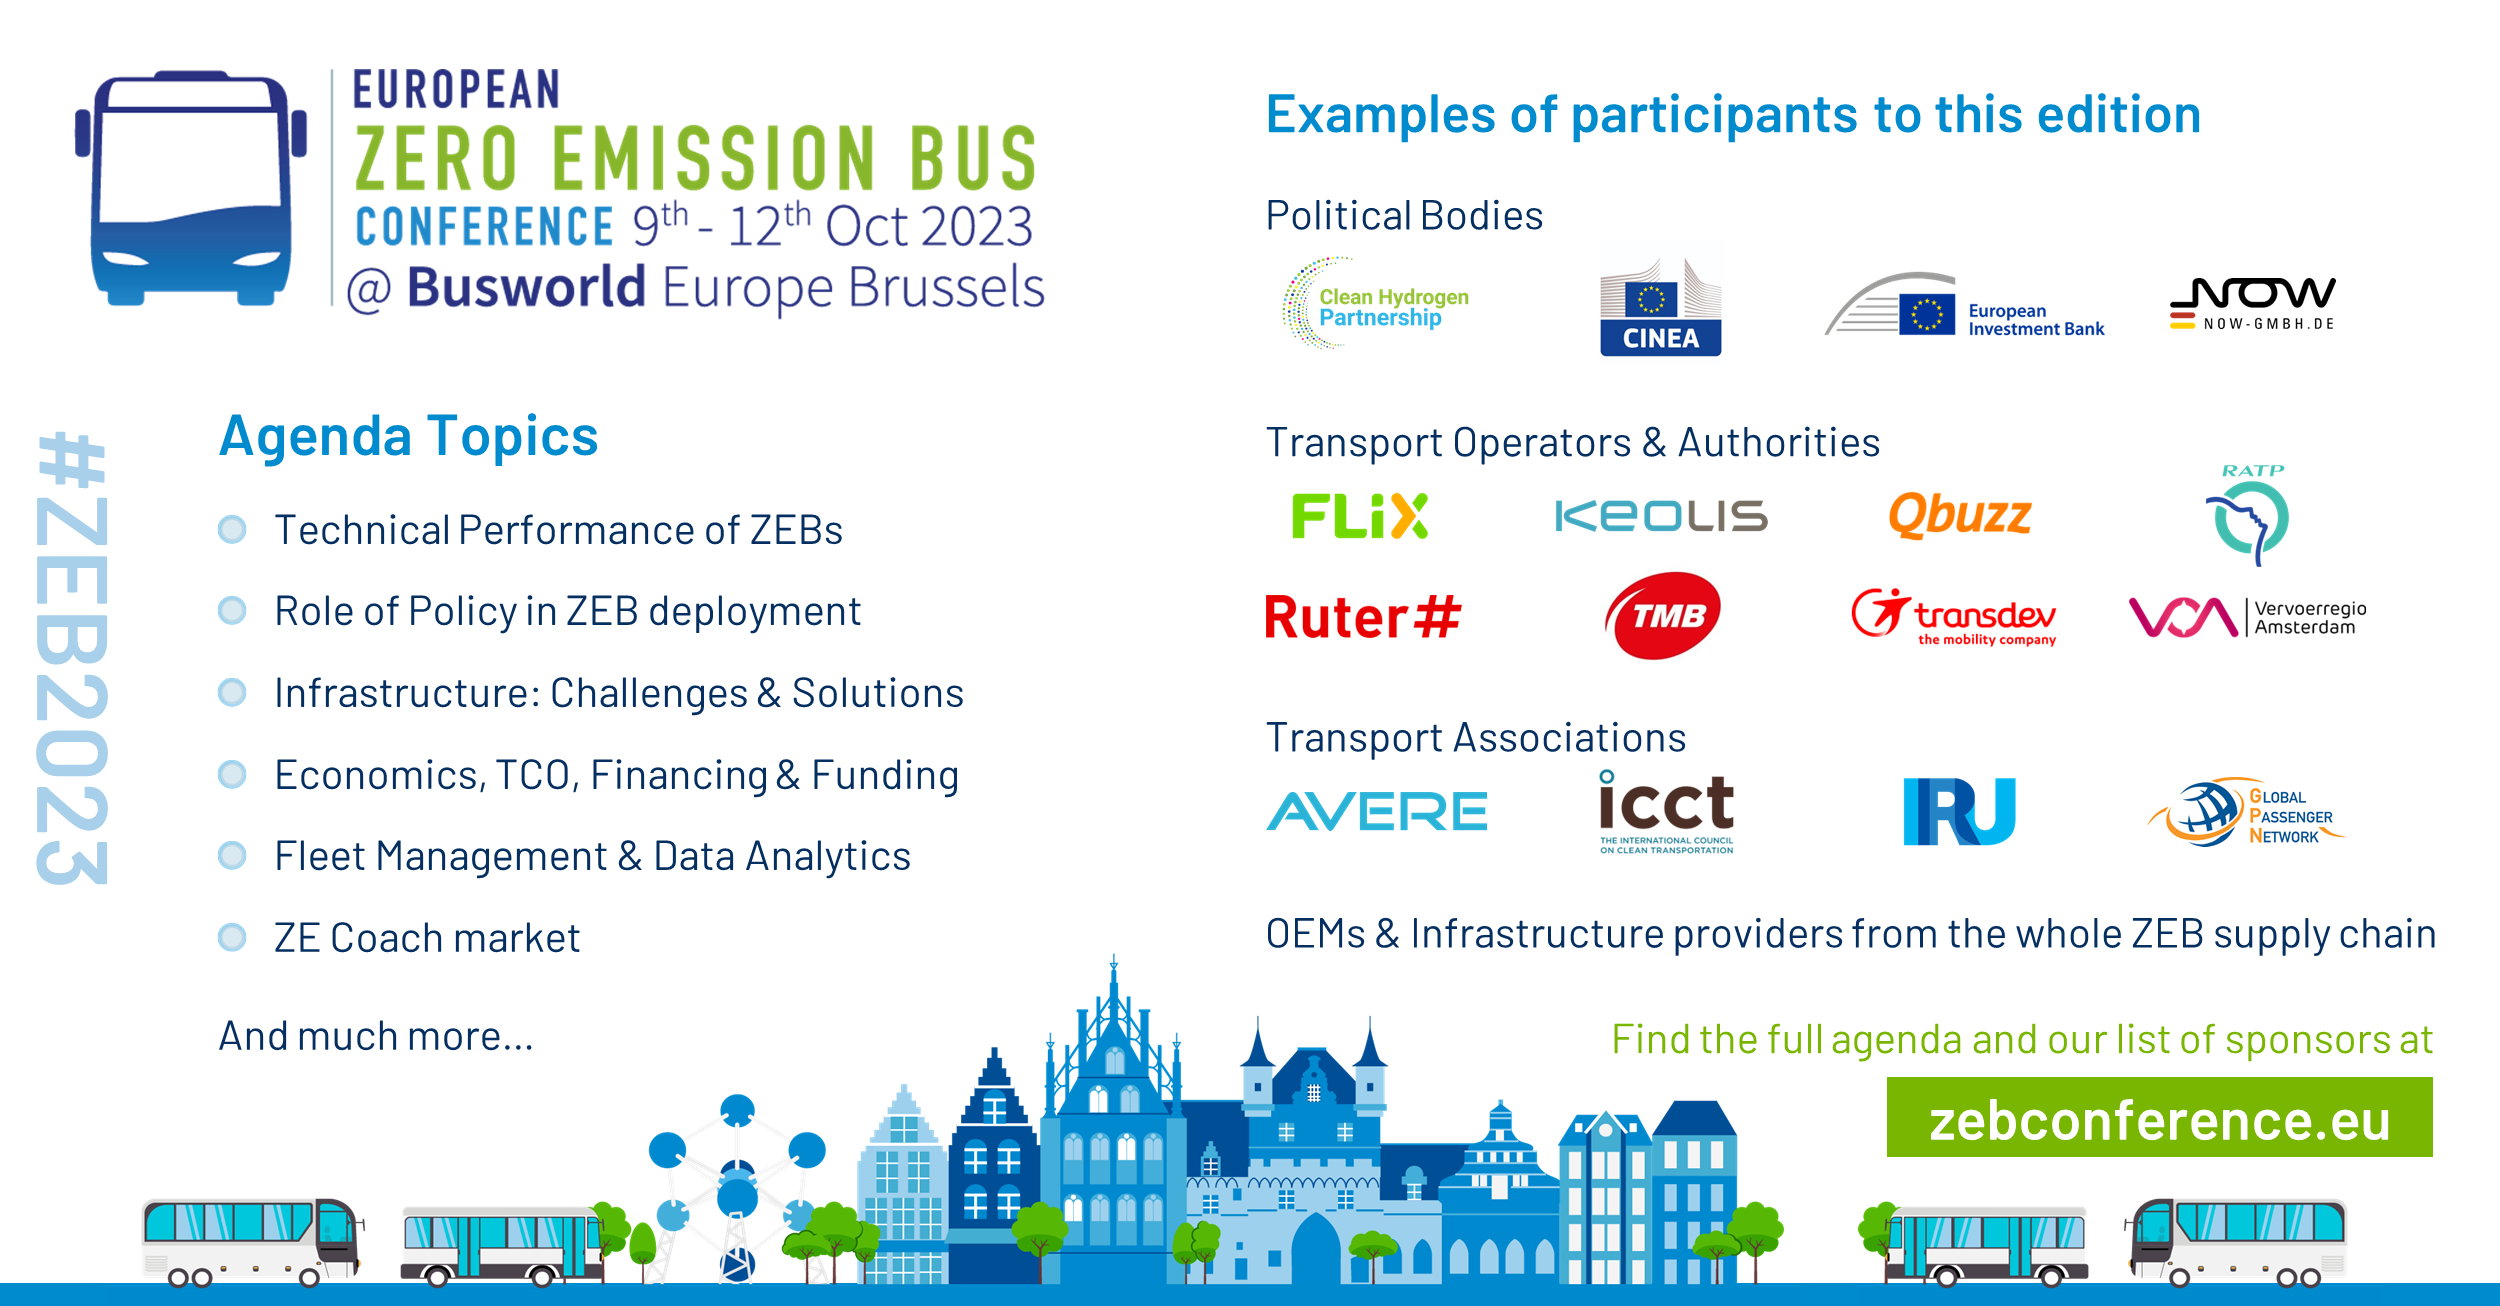 ZEB 2023 conference – a content-driven conference with prominent figures who are shaping the future of zero emission buses